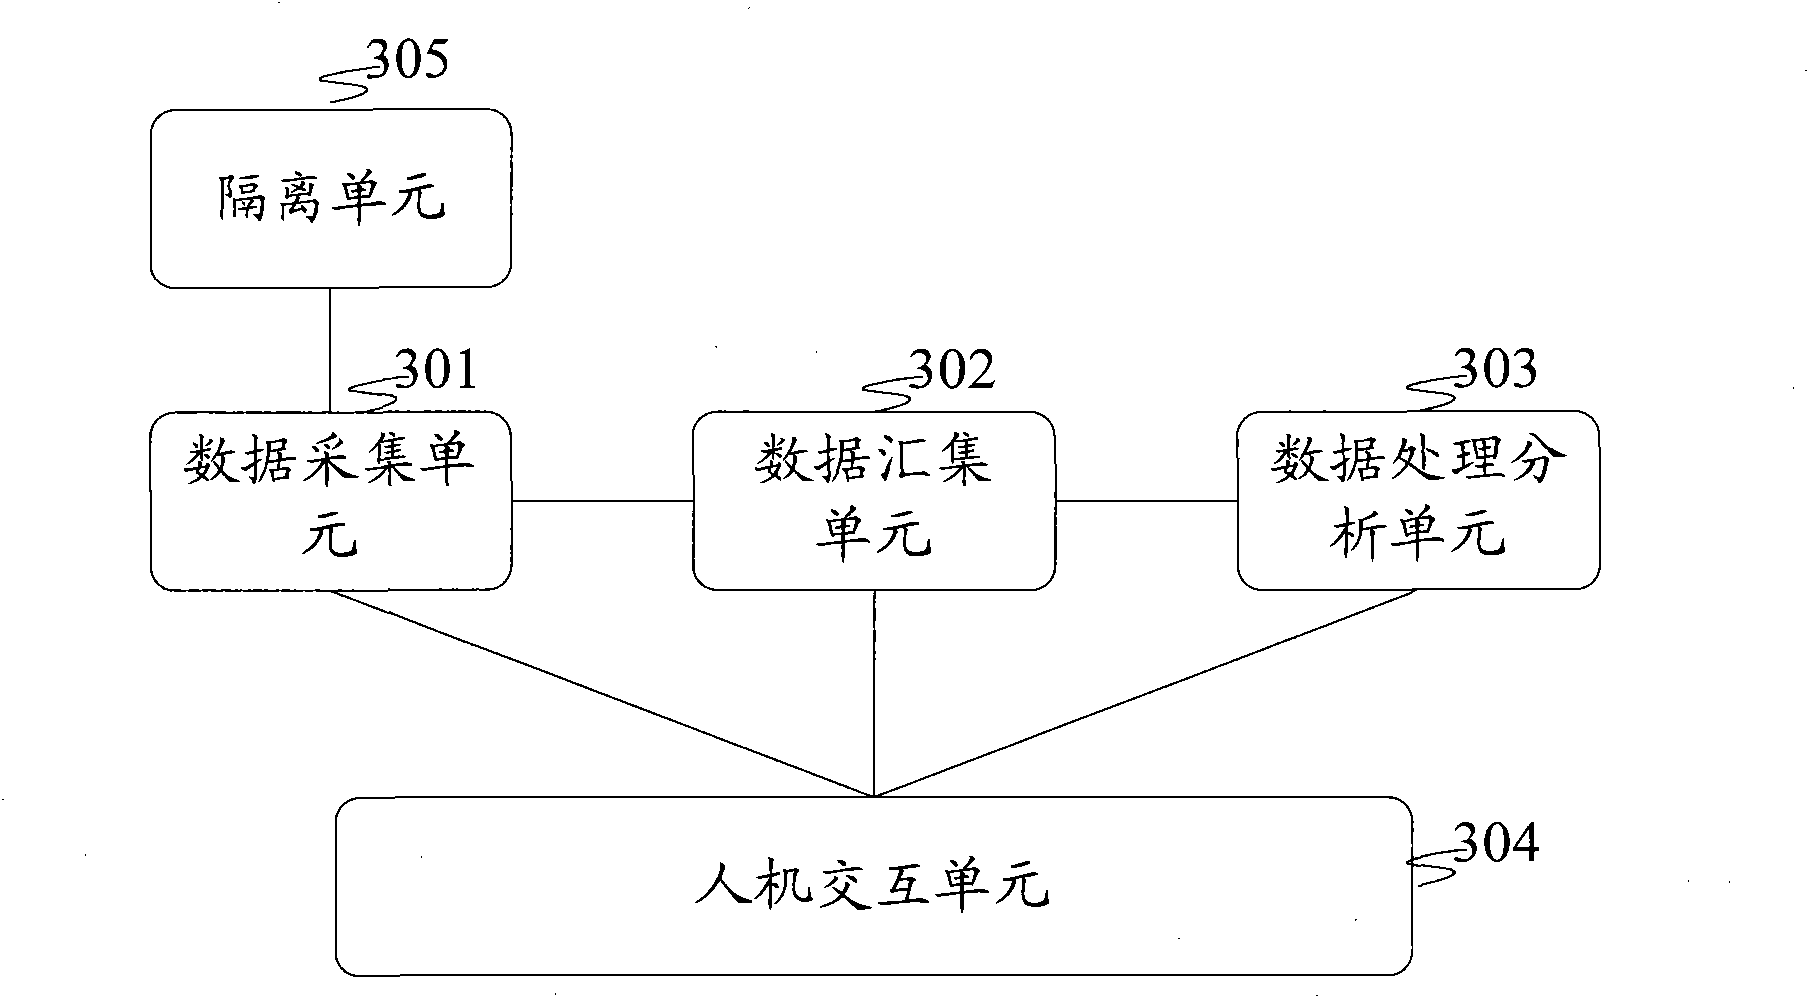 Railway signal monitoring method and system